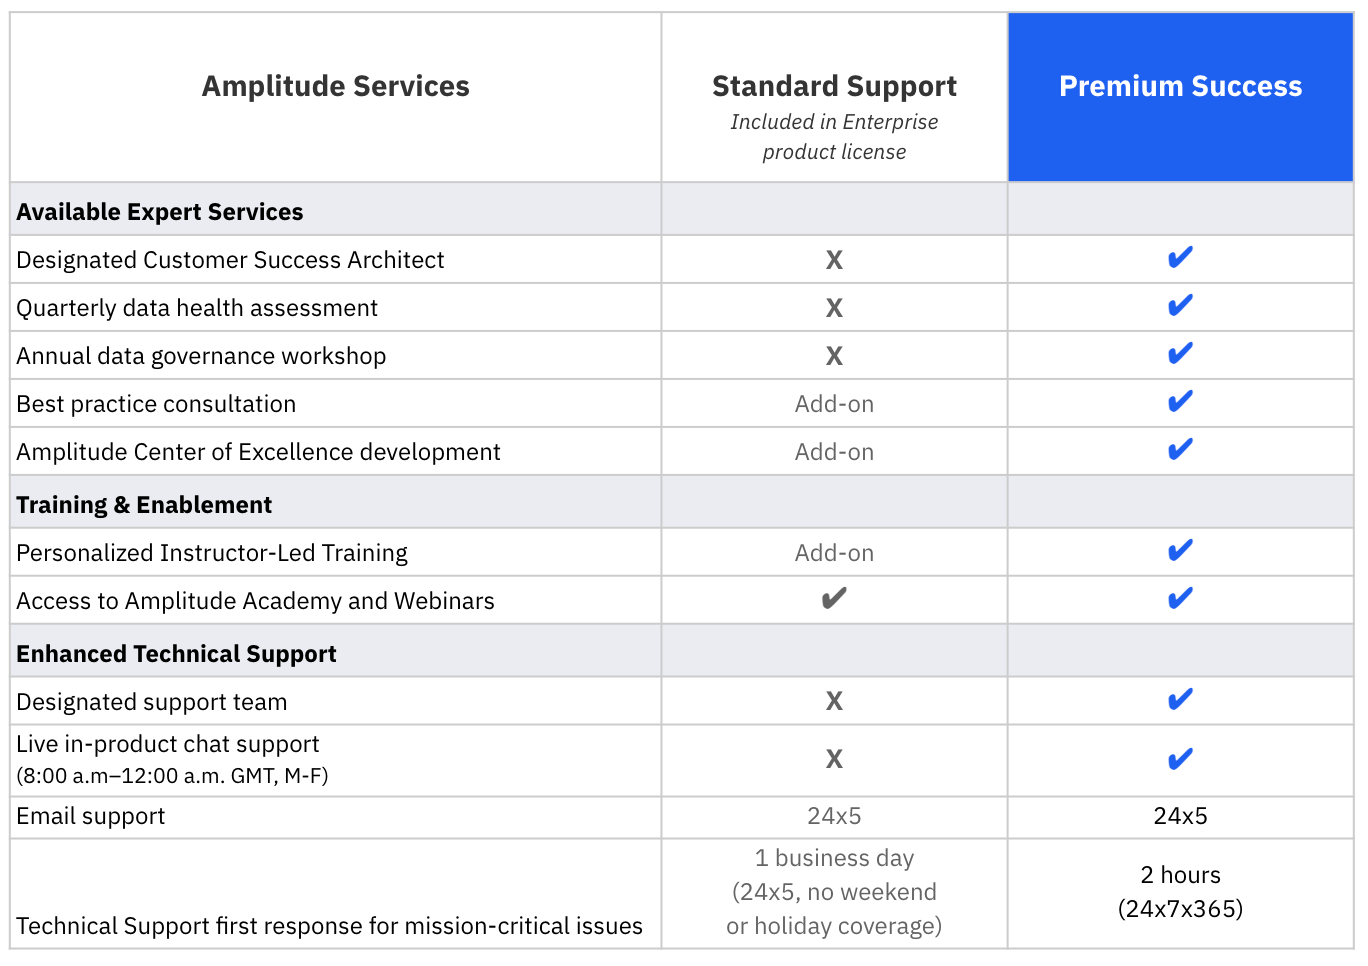 A chart showing the services included in Amplitude Premium Success